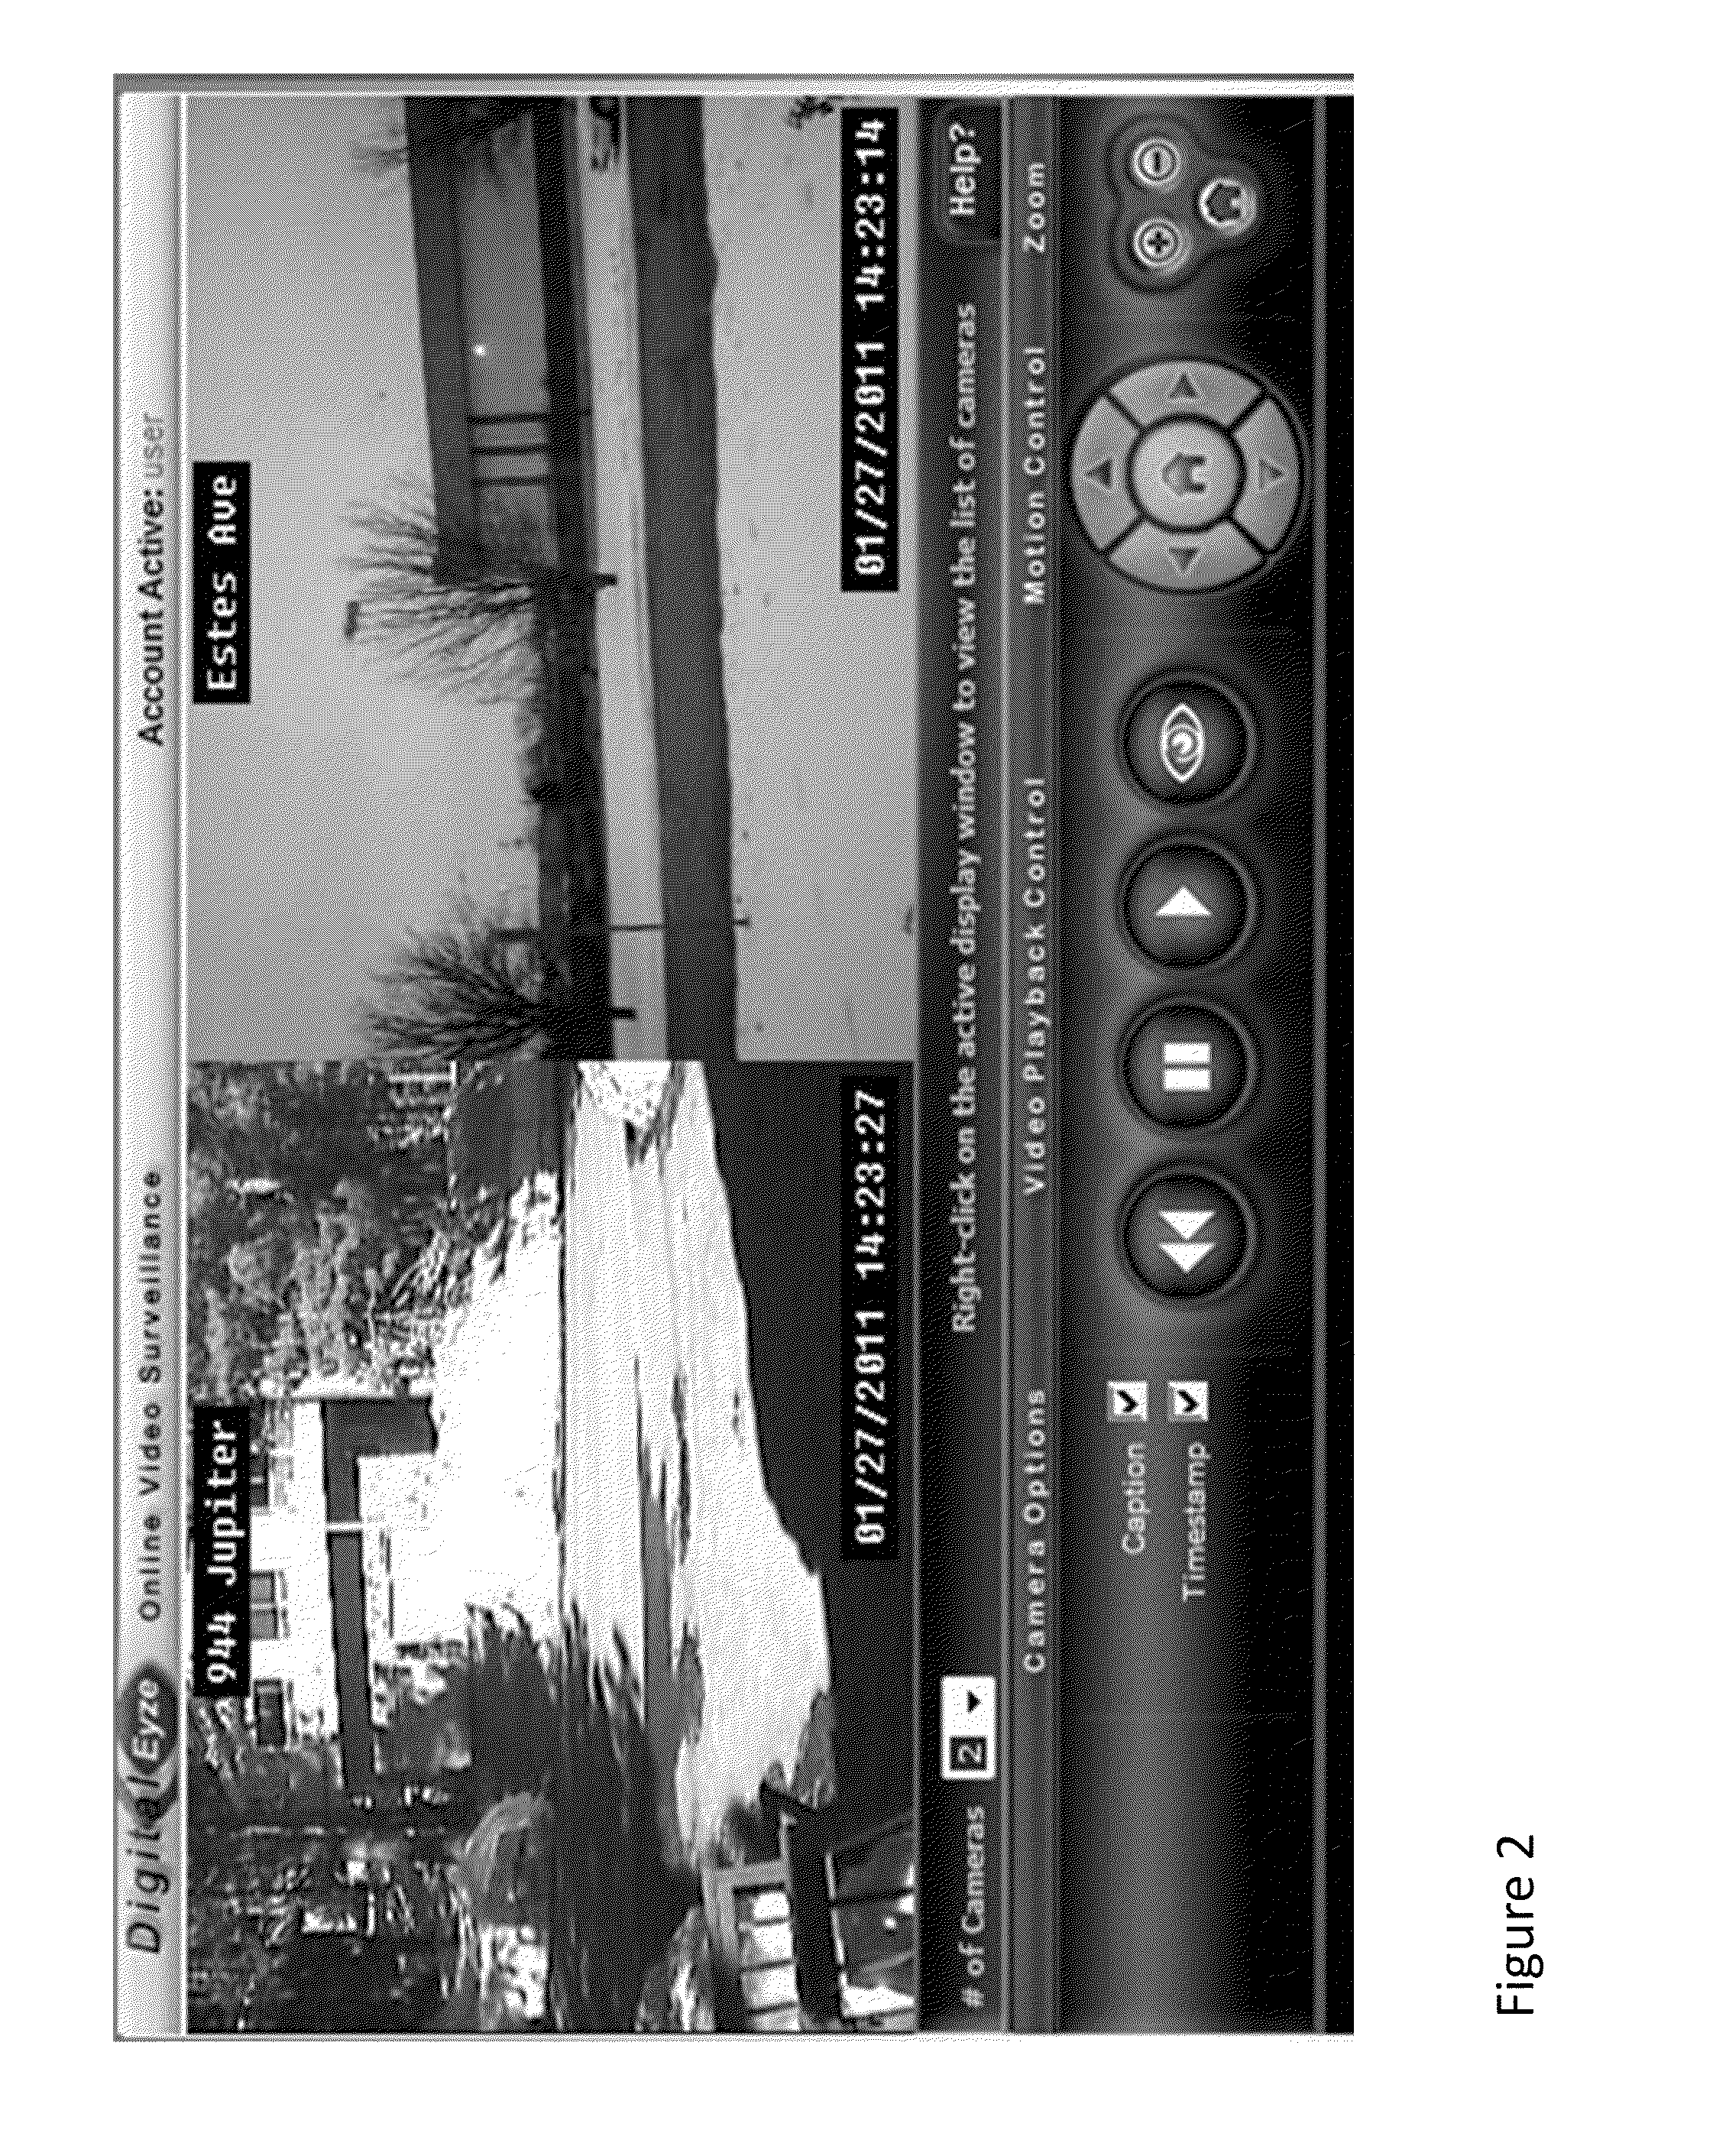 System and method for account-based storage and playback of remotely recorded video data